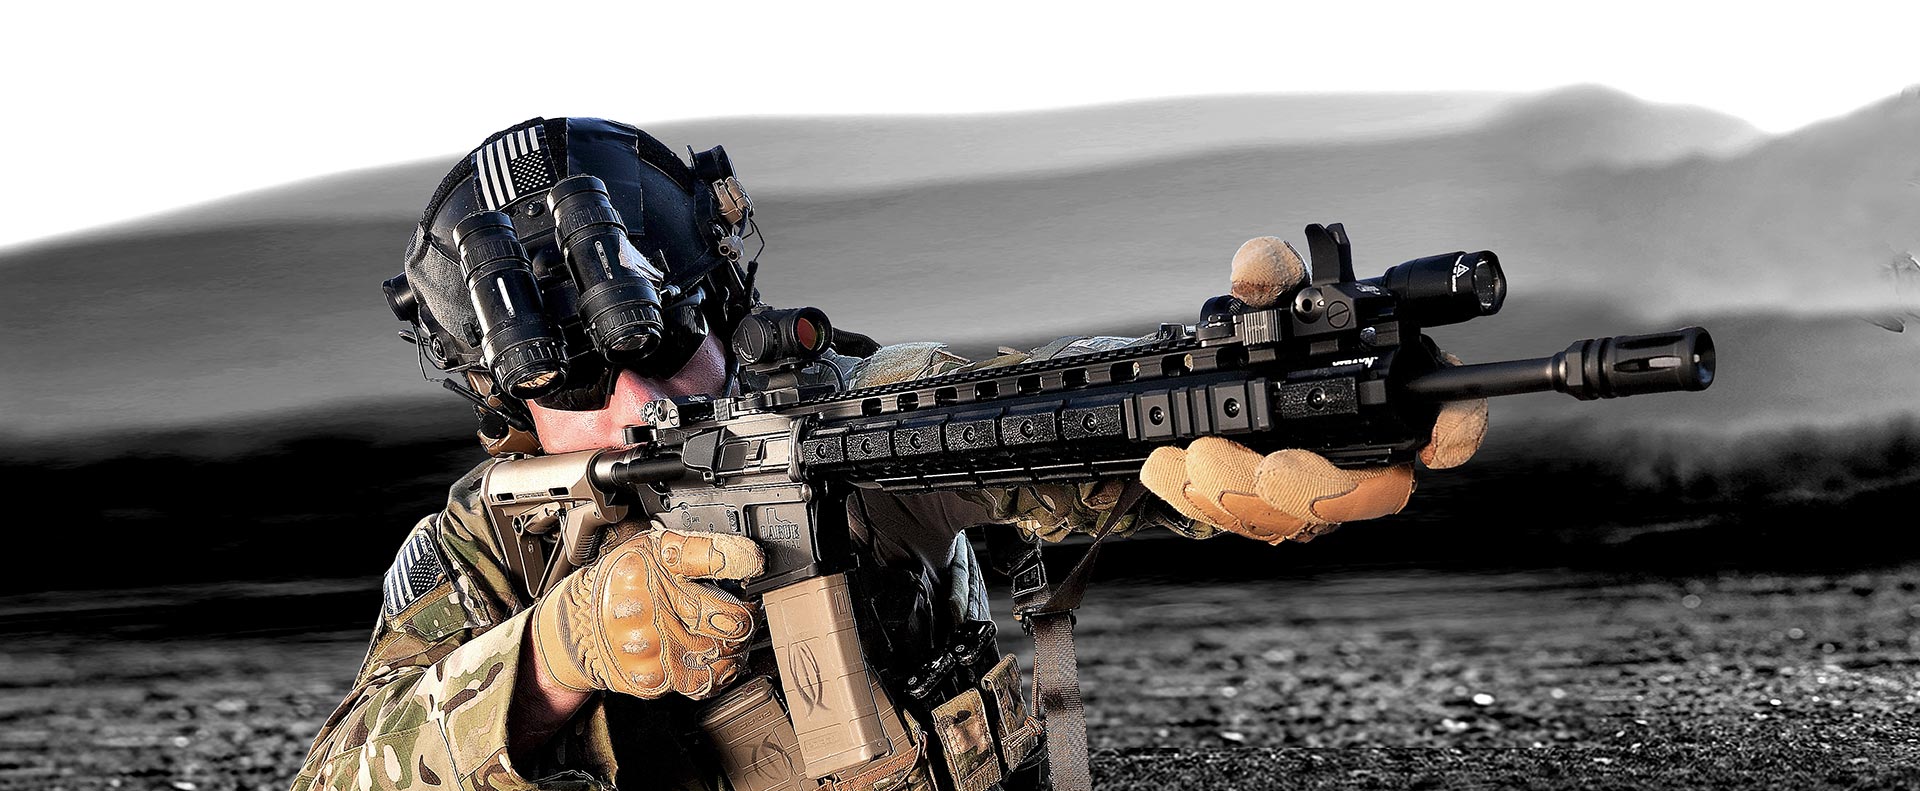 TYR Groundbreaking PV® Nylon Redefines The Performance Of Tactical Gear.